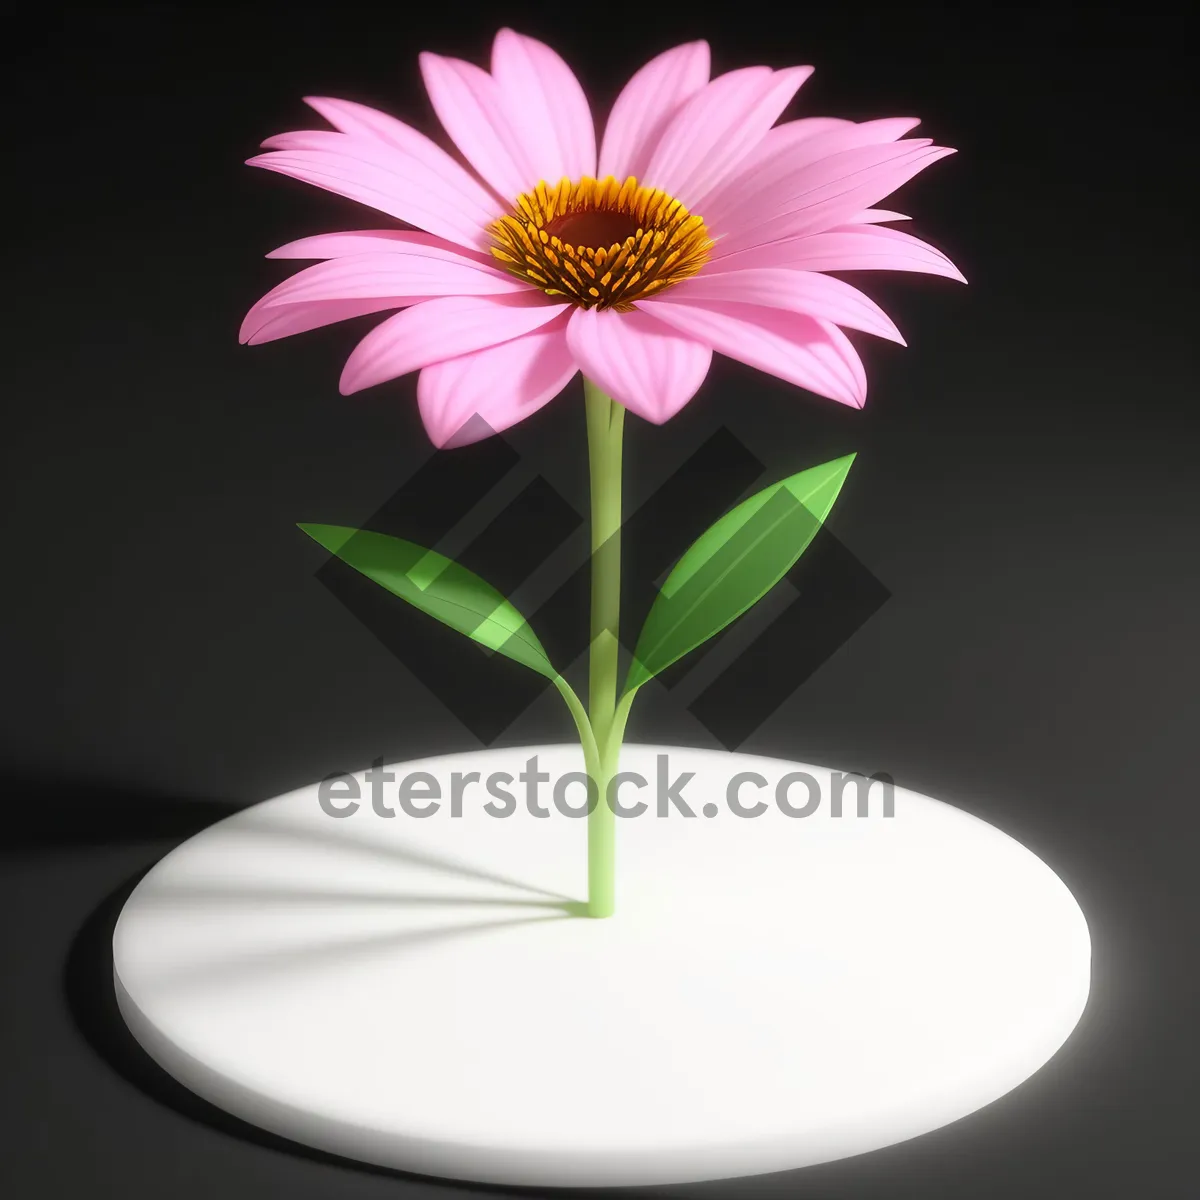 Picture of Vibrant Pink Daisy Blossom in Full Bloom